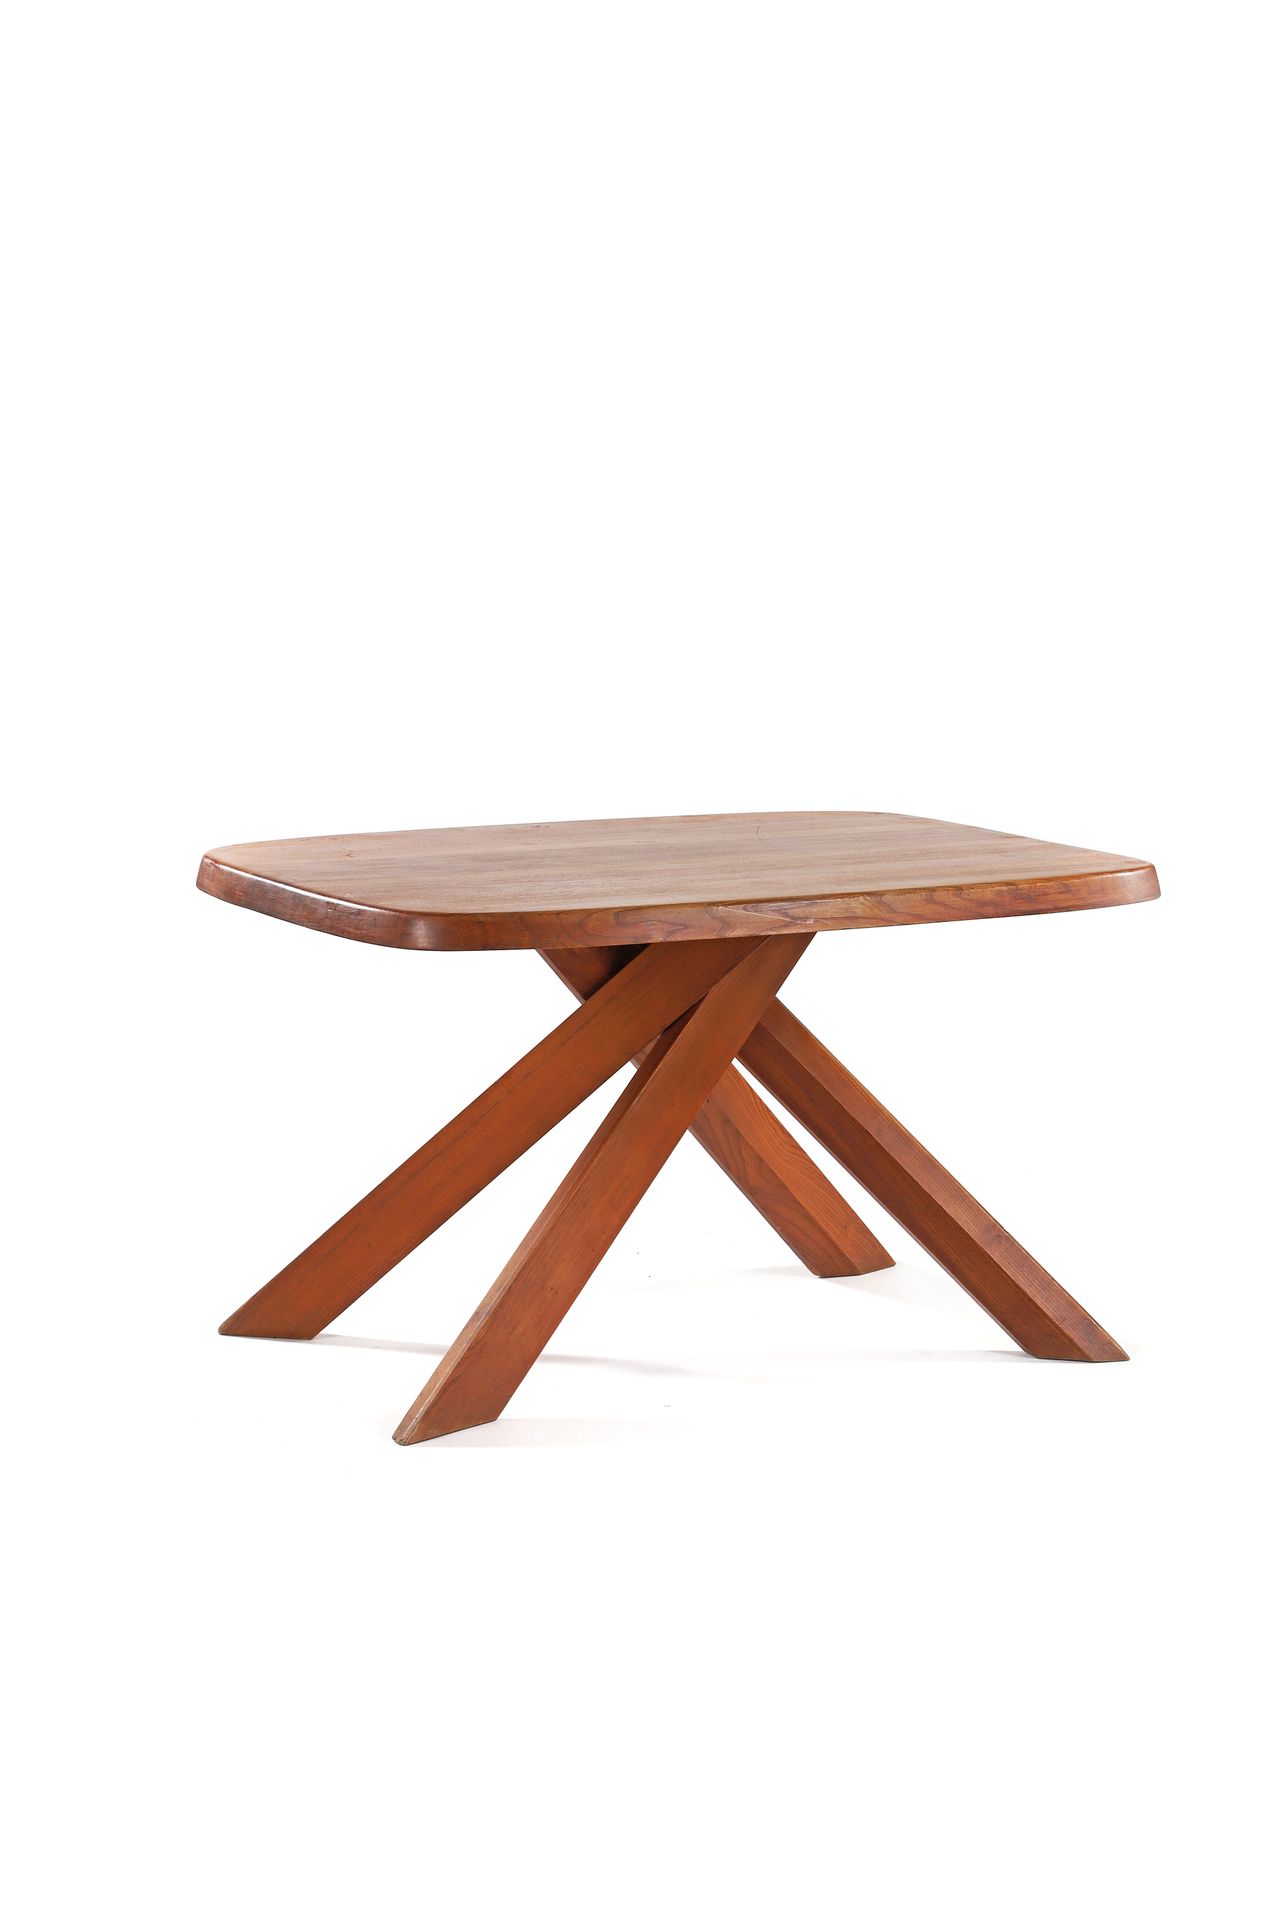 Null Pierre CHAPO (1927-1987) Table T35A dite Aban Orme 71 x 124 x 82 cm. Circa &hellip;